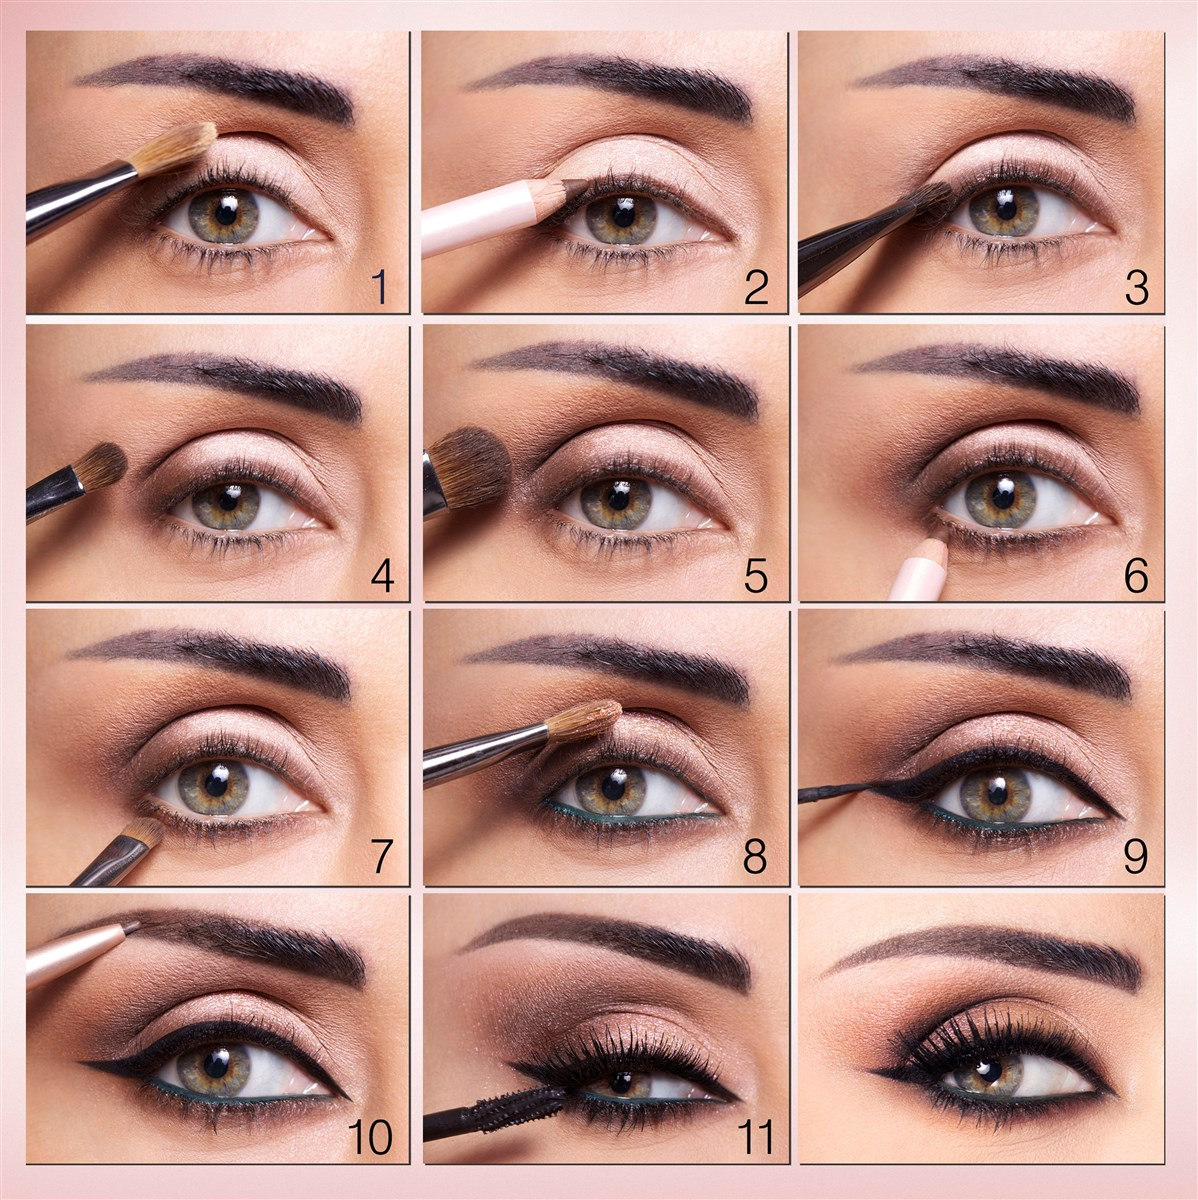 How To Apply Eye Makeup With Pictures Easiest Way How To Apply Eyeshadow Properly